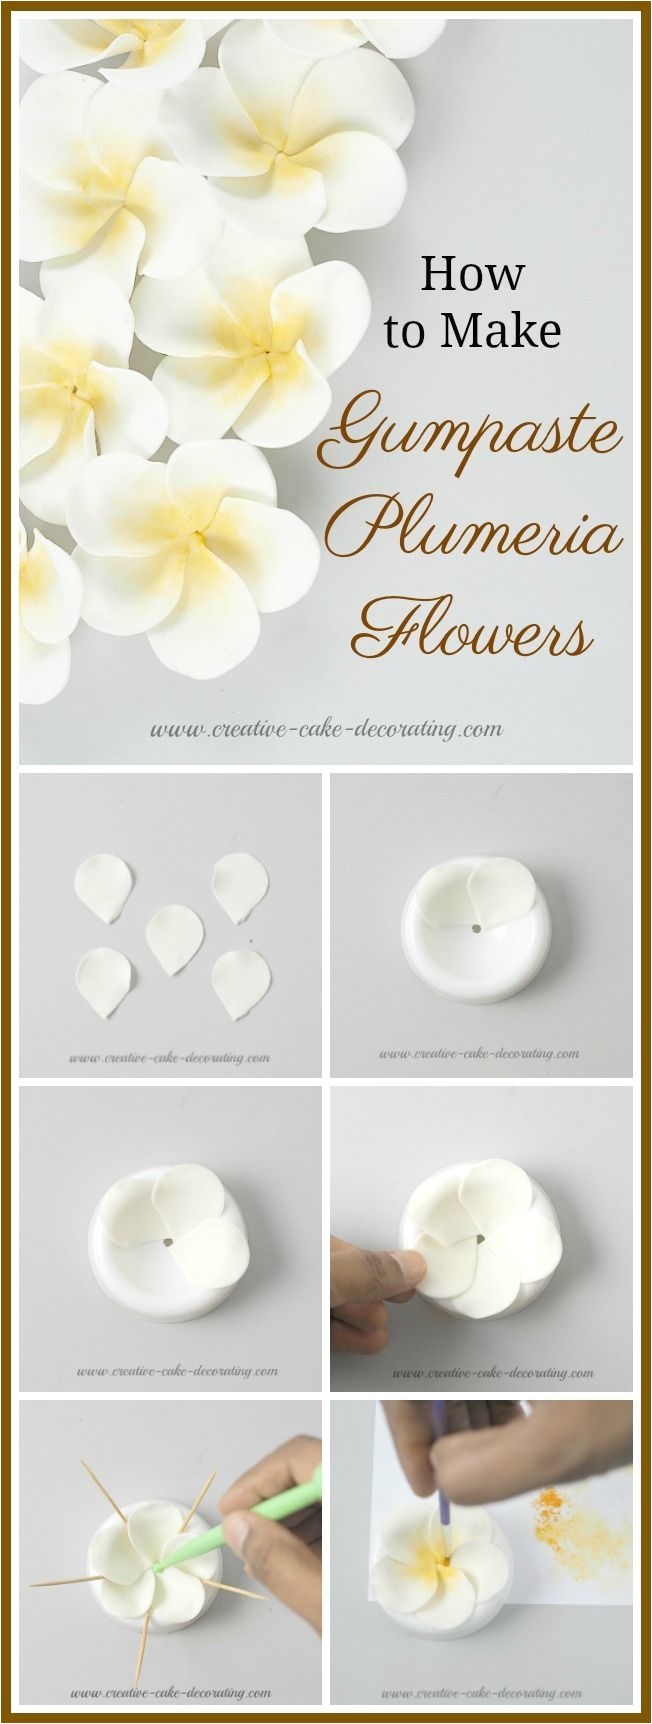 here is a plumeria wedding cake i designed with gumpaste plumeria flowers also known as